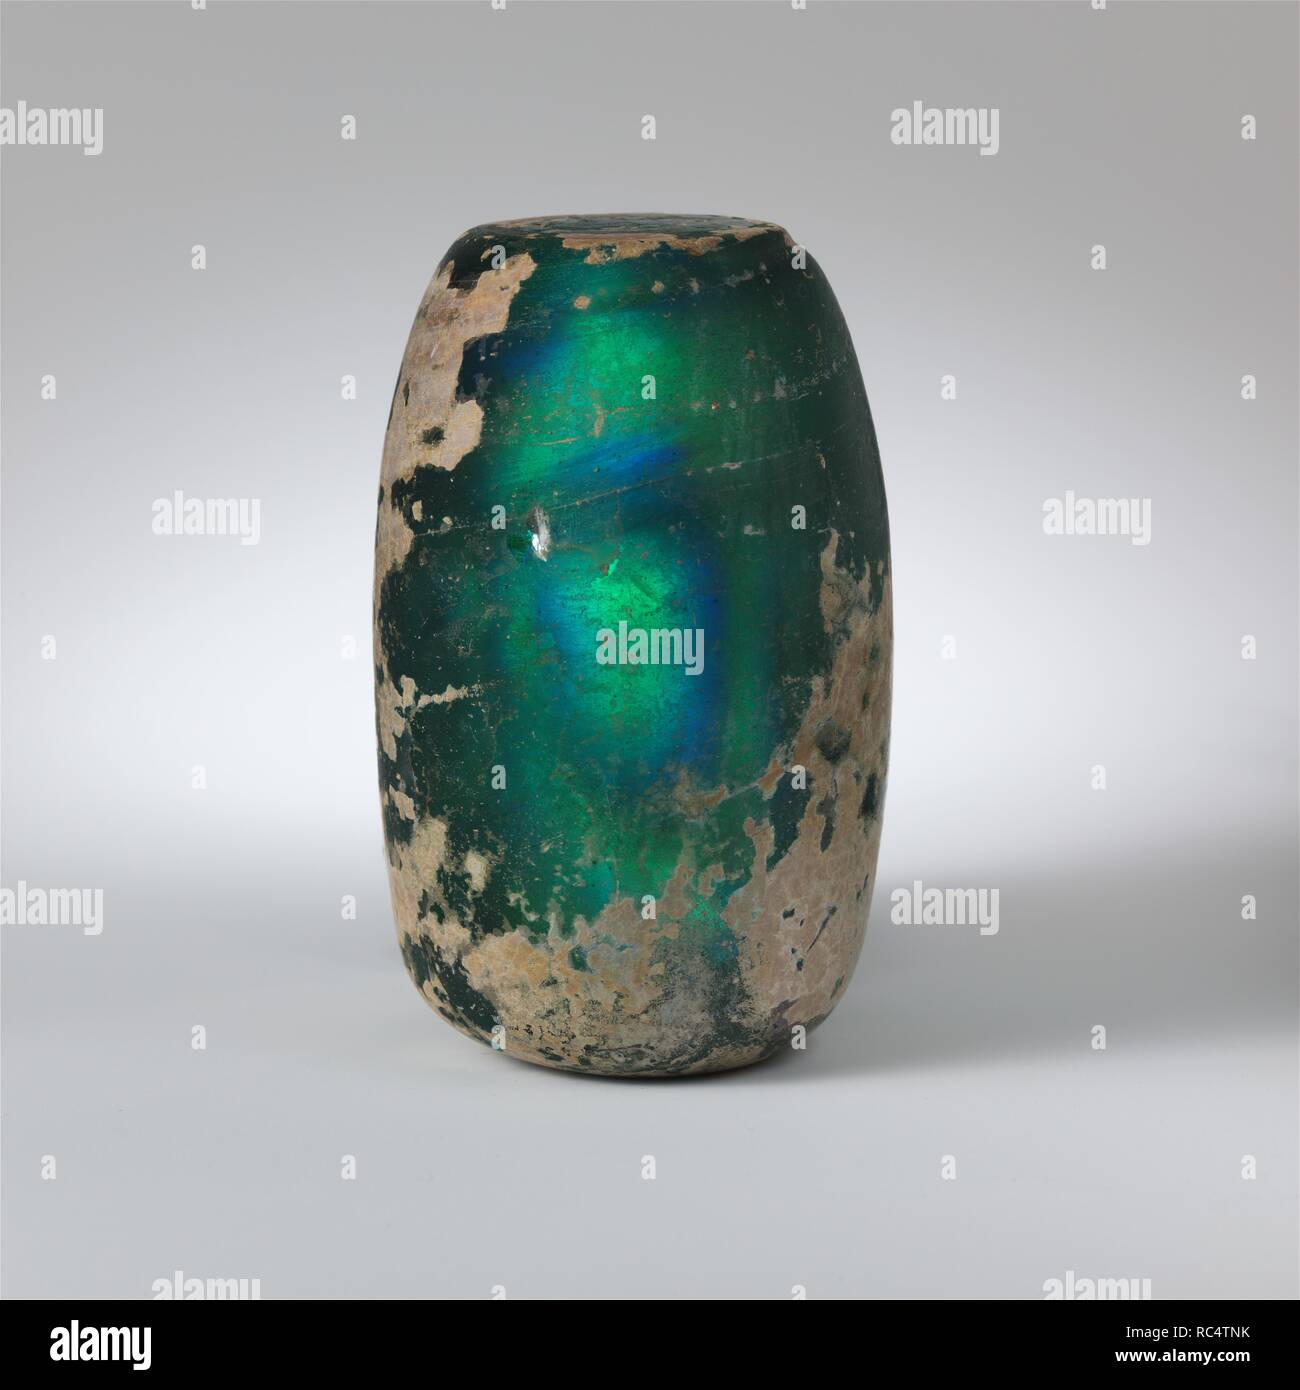 Glass weight. Culture: Roman (?). Dimensions: Height: 4 1/16 in., (10.3 cm)  Weight: 1.9 lb. (861.8g). Date: 1st century A.D. or later.  Translucent turquoise blue.  Solid cylindrical shape; flat top; convex side; bottom slightly concave with projecting pontil scar at center.  Intact, but one small surface chip and crack in side; few bubbles; dulling, creamy weathering, and brilliant iridescence.  This unusual object may be seen as a glass weight. The brilliant turquoise color resembles that of some early Roman glass but it probably belongs to the early  Islamic period. Museum: Metropolitan Mu Stock Photo